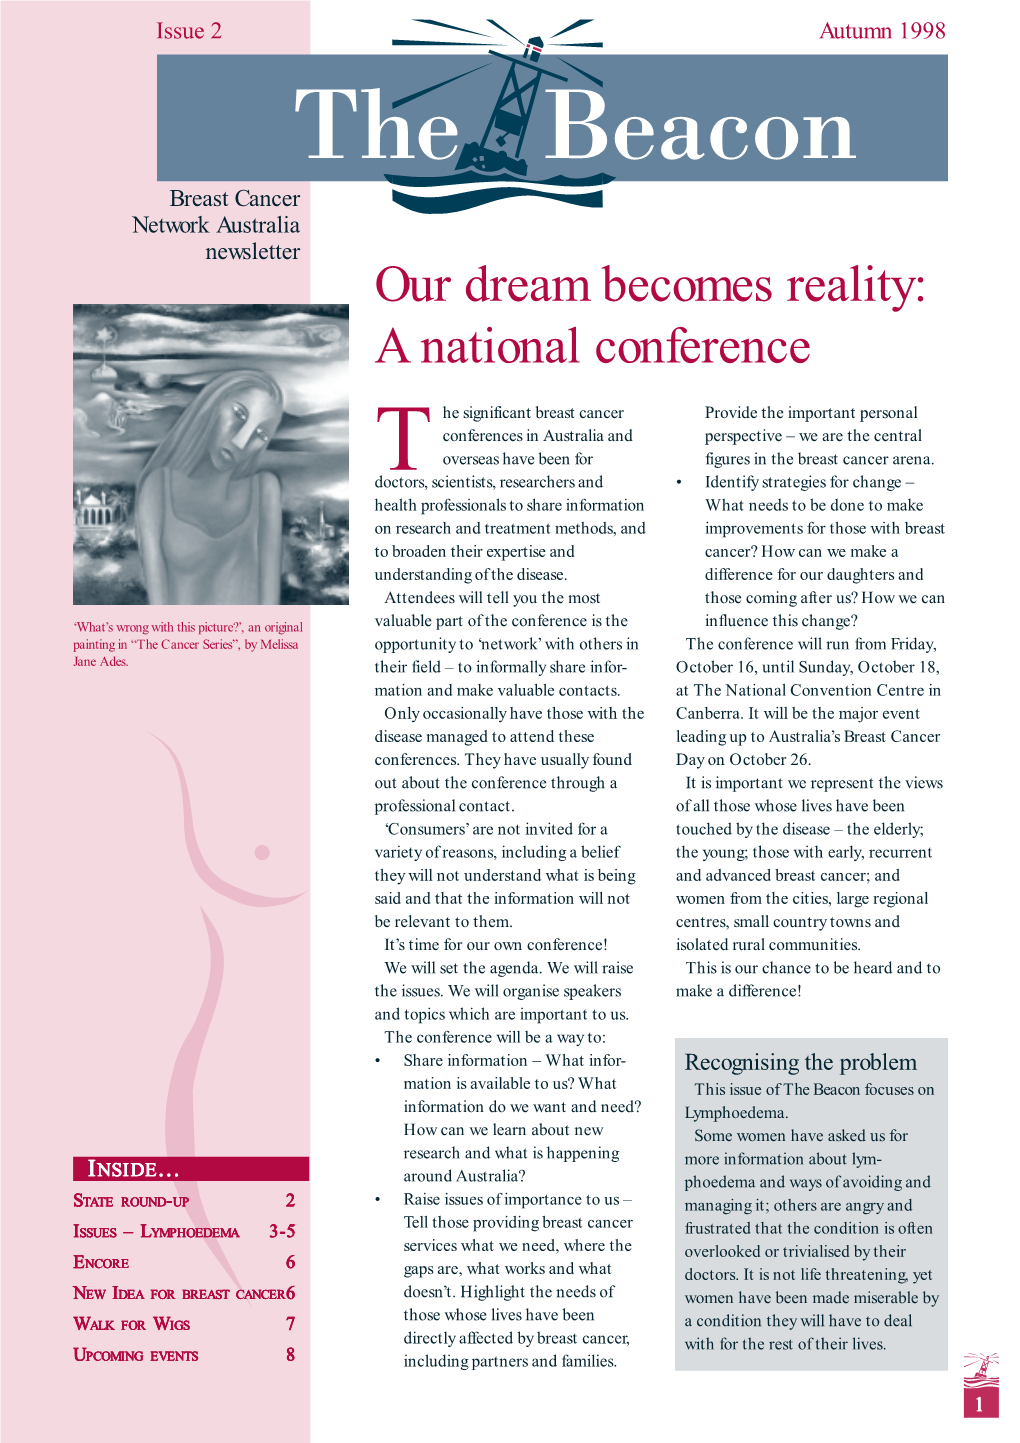 Our Dream Becomes Reality: a National Conference